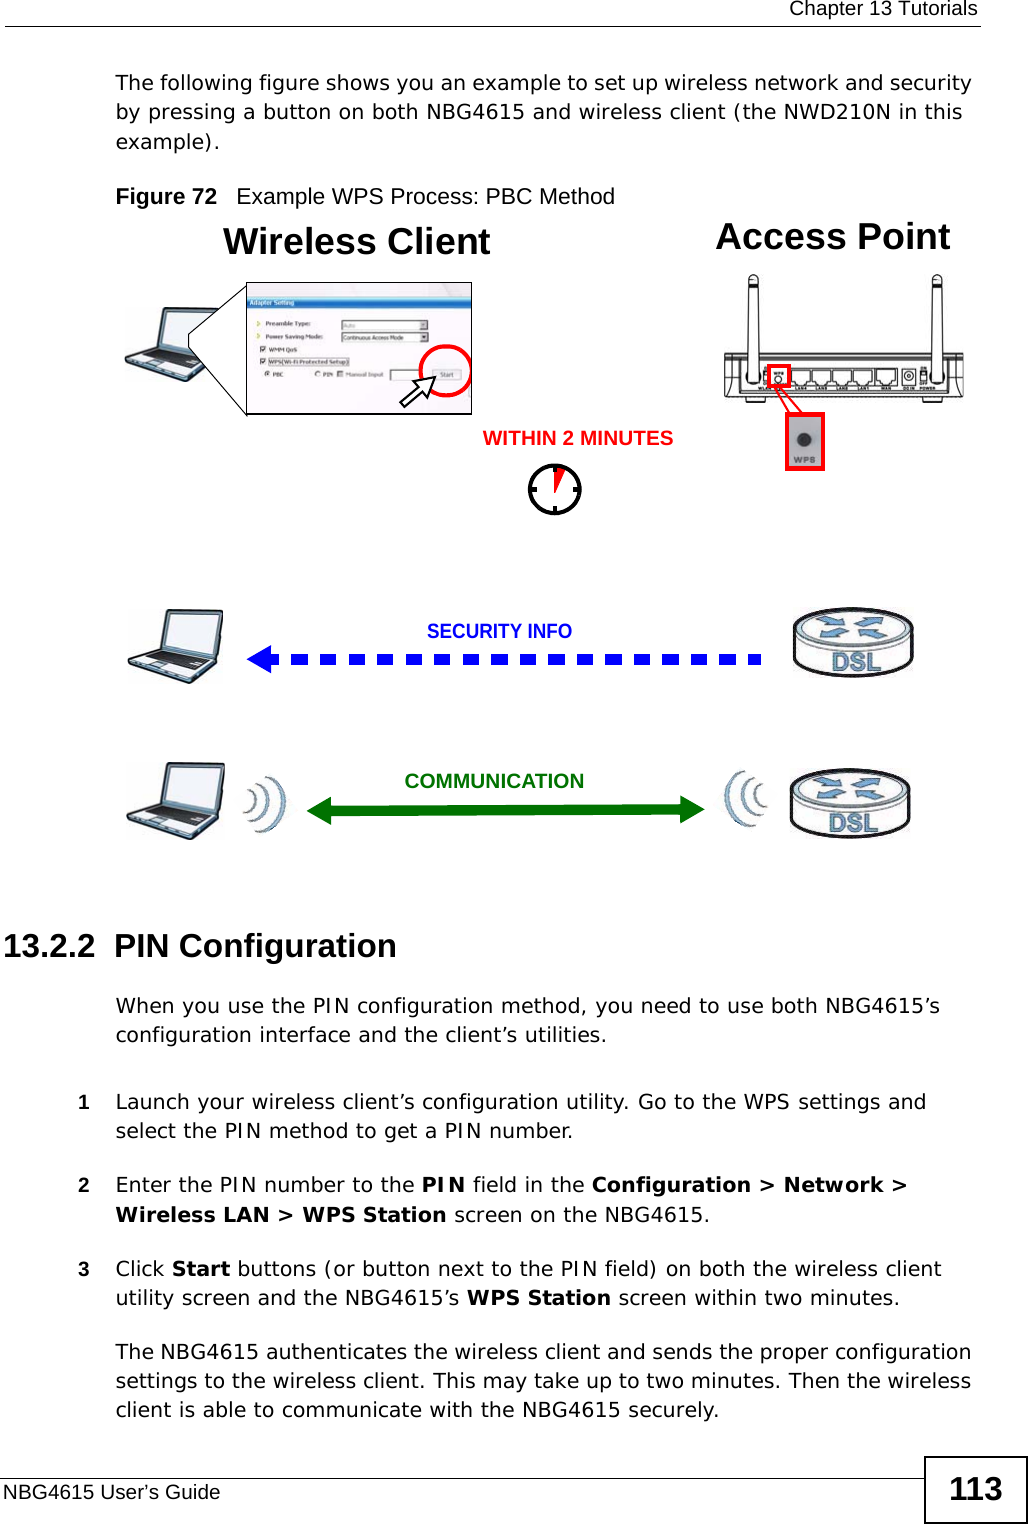  Chapter 13 TutorialsNBG4615 User’s Guide 113The following figure shows you an example to set up wireless network and security by pressing a button on both NBG4615 and wireless client (the NWD210N in this example).Figure 72   Example WPS Process: PBC Method13.2.2  PIN ConfigurationWhen you use the PIN configuration method, you need to use both NBG4615’s configuration interface and the client’s utilities.1Launch your wireless client’s configuration utility. Go to the WPS settings and select the PIN method to get a PIN number.2Enter the PIN number to the PIN field in the Configuration &gt; Network &gt; Wireless LAN &gt; WPS Station screen on the NBG4615.3Click Start buttons (or button next to the PIN field) on both the wireless client utility screen and the NBG4615’s WPS Station screen within two minutes.The NBG4615 authenticates the wireless client and sends the proper configuration settings to the wireless client. This may take up to two minutes. Then the wireless client is able to communicate with the NBG4615 securely. Wireless Client    Access PointSECURITY INFOCOMMUNICATIONWITHIN 2 MINUTES